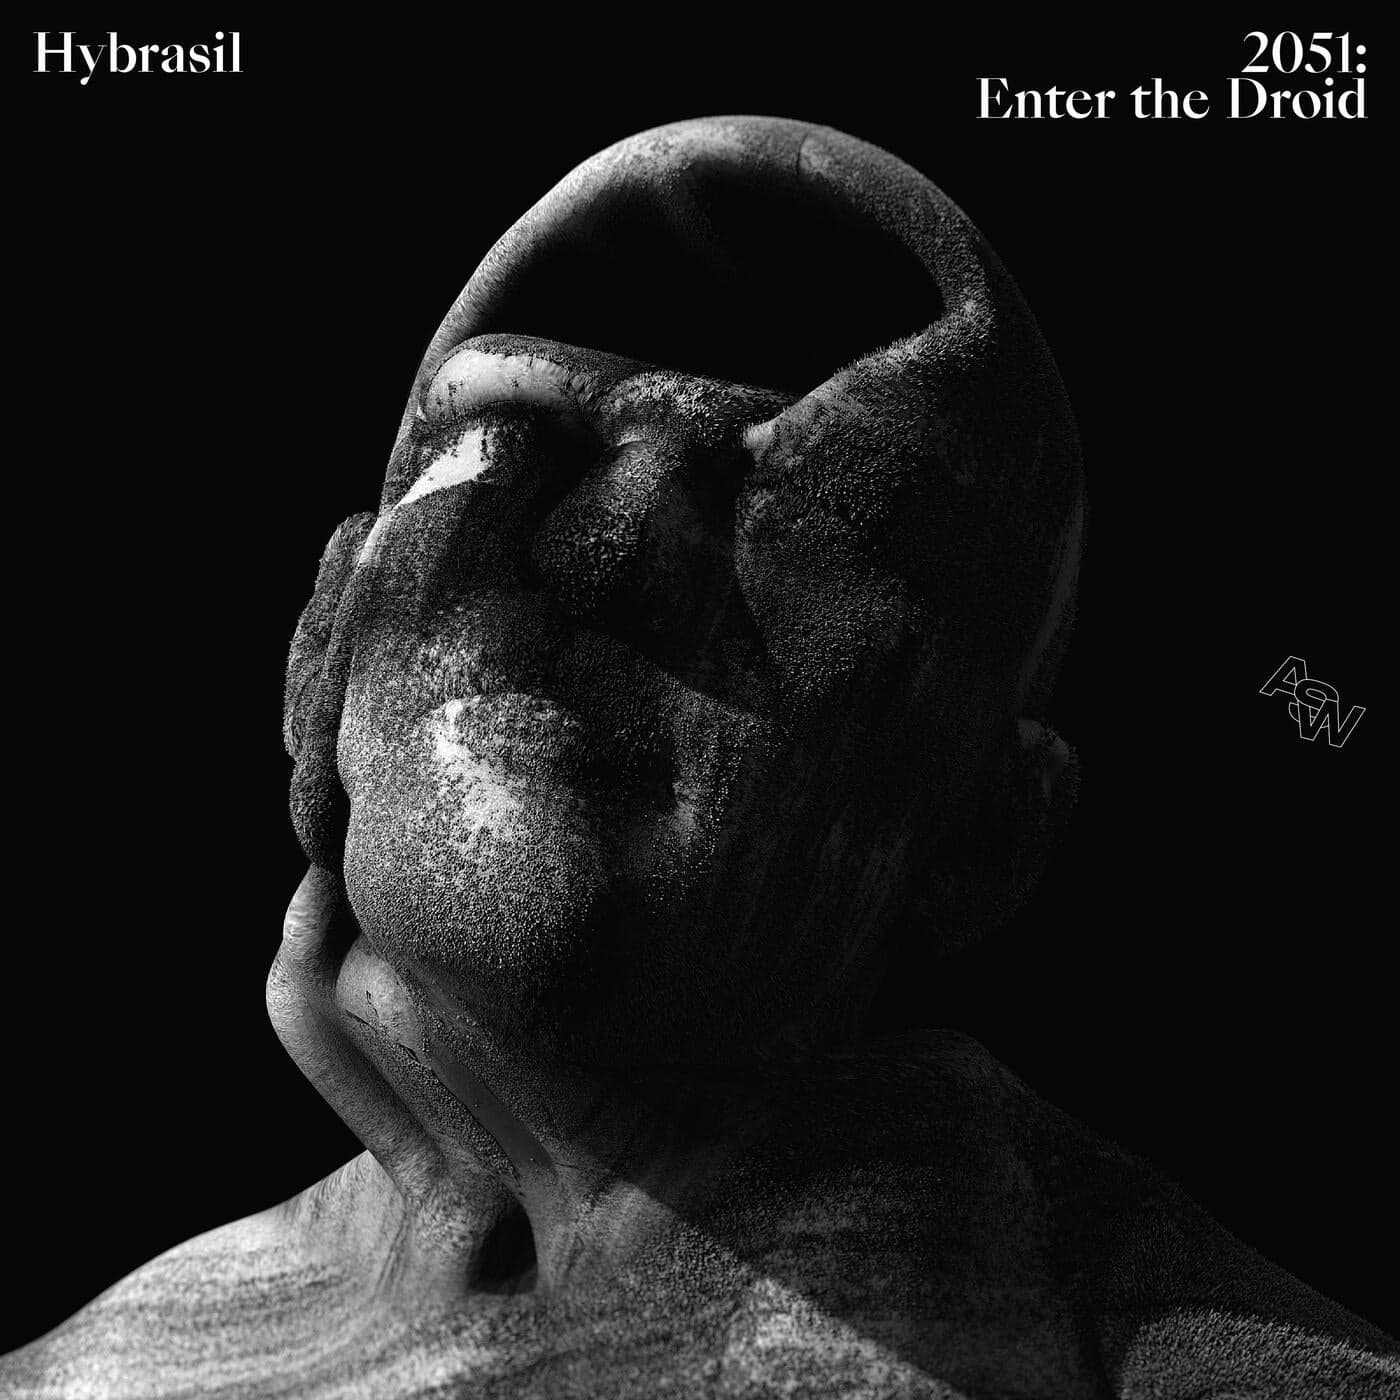 image cover: Hybrasil - 2051: Enter the Droid / ASWR033